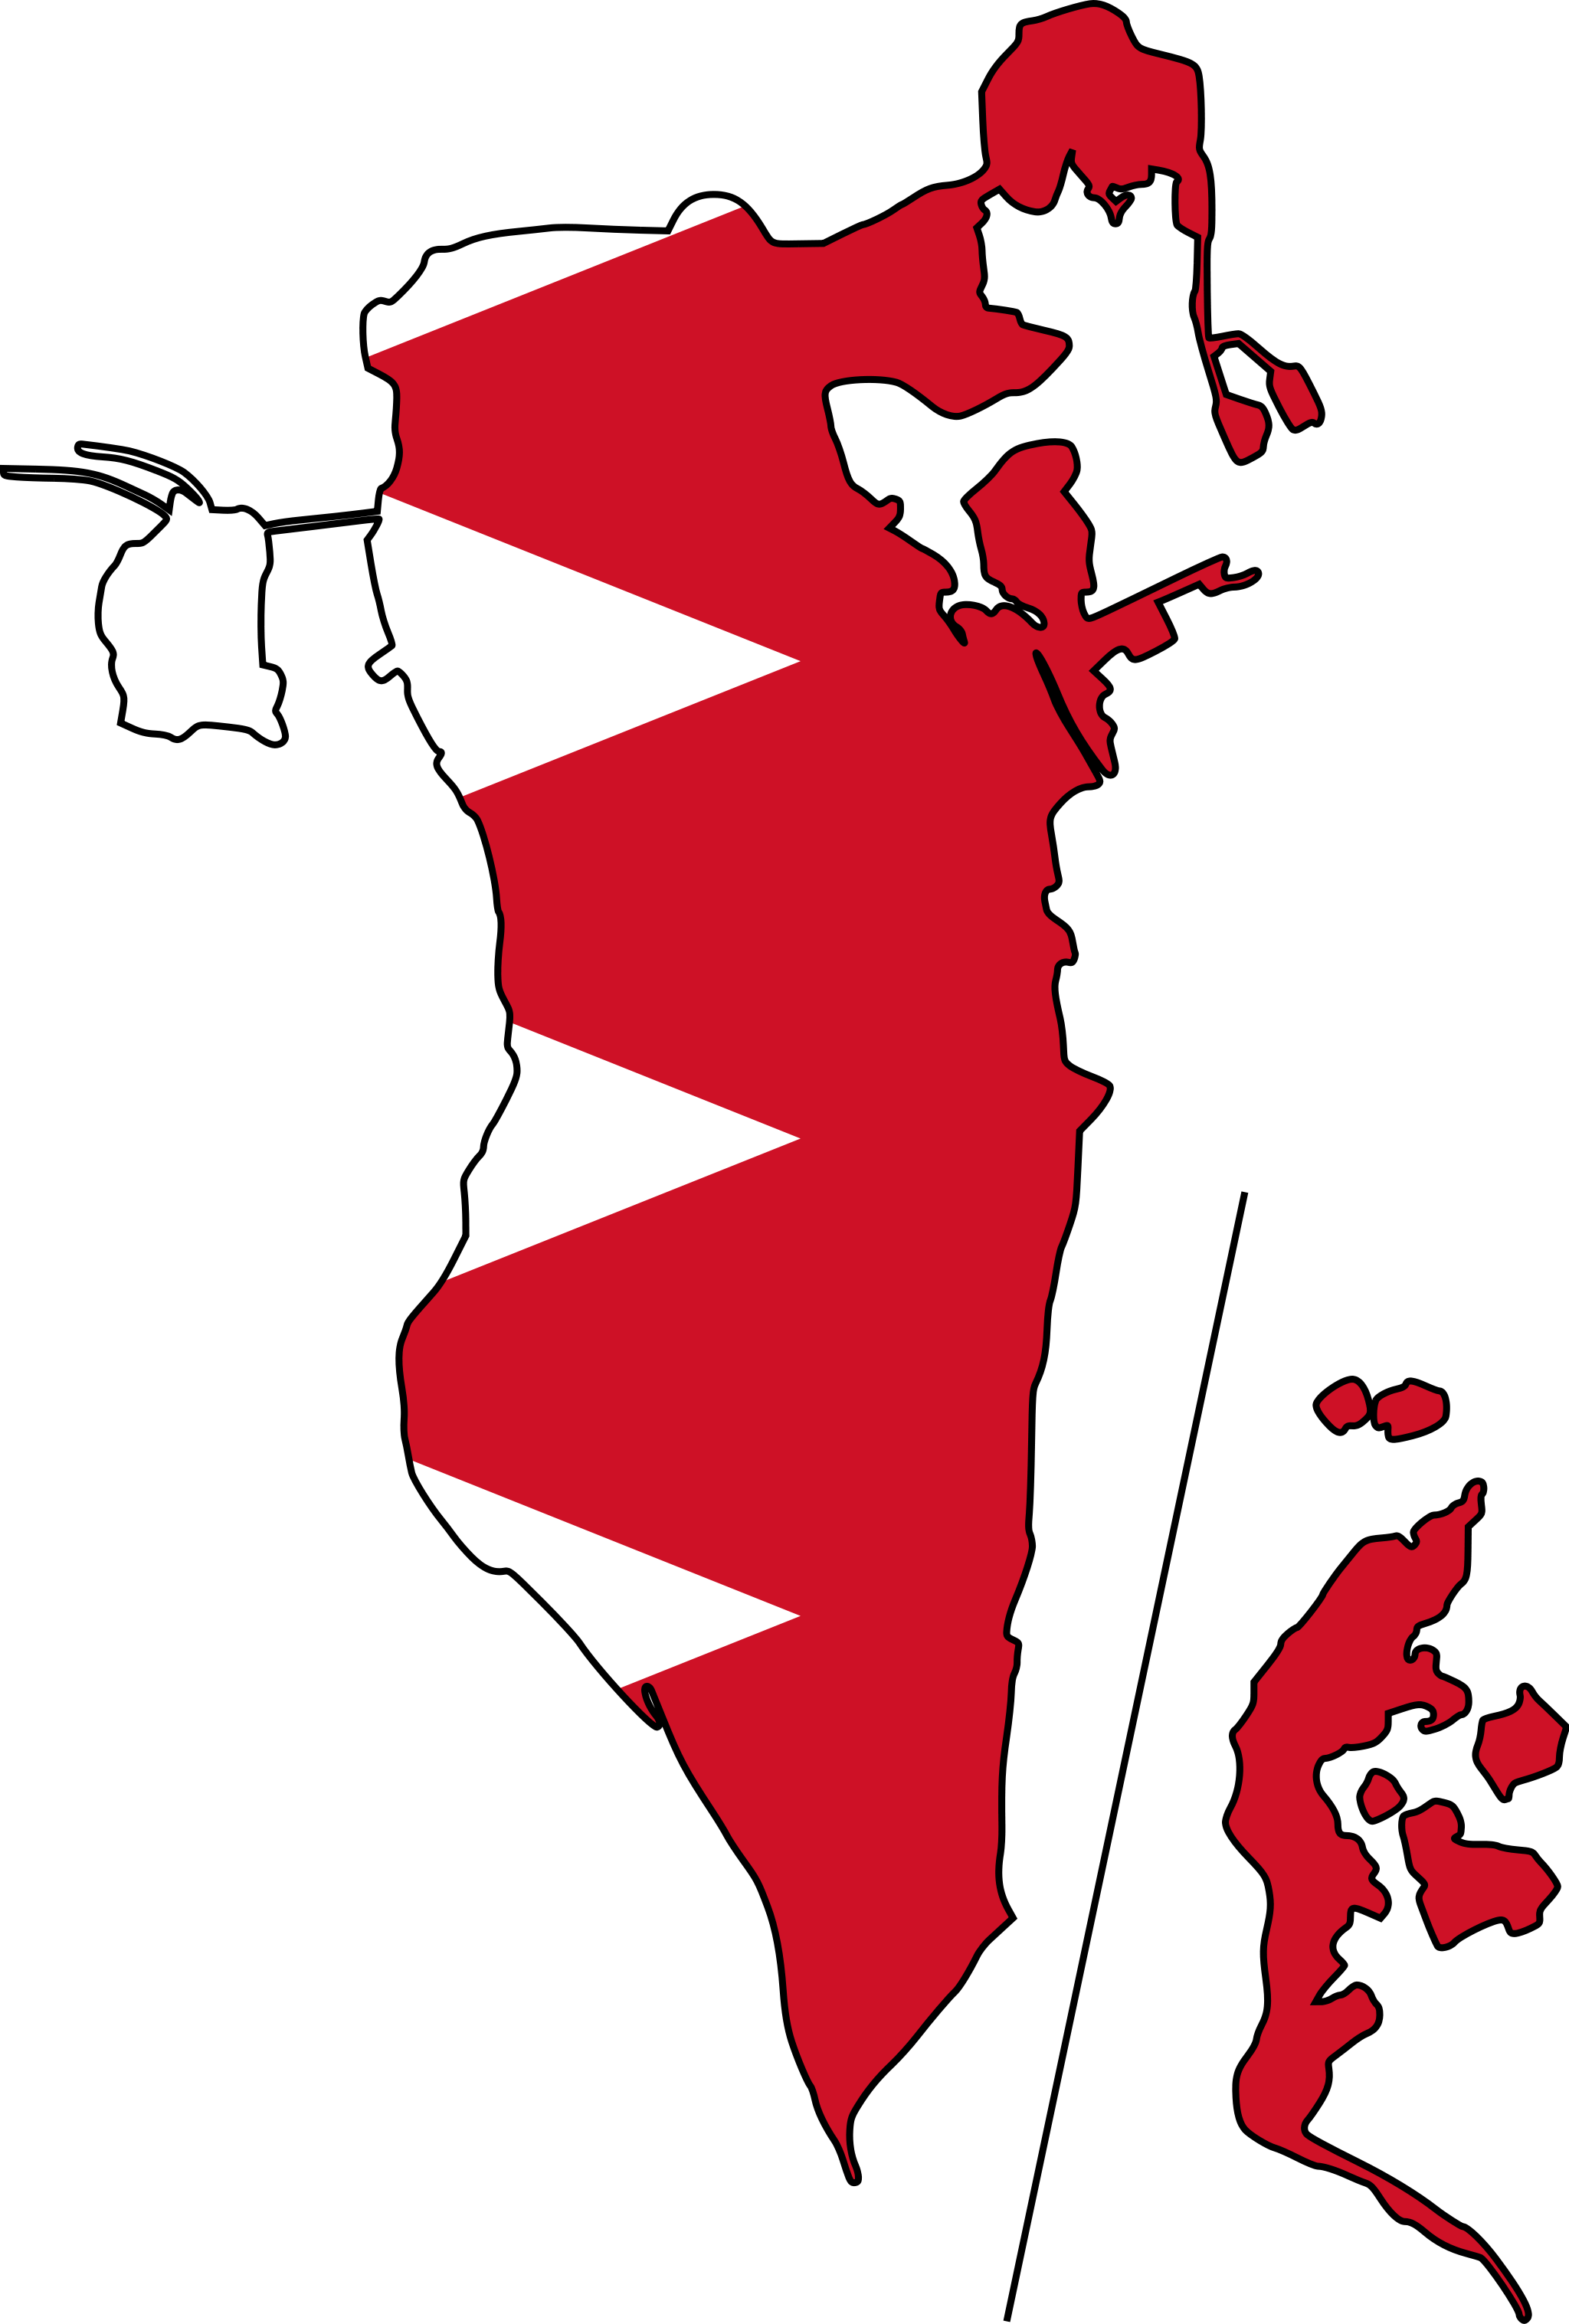 File:Arms of Bahrain.png